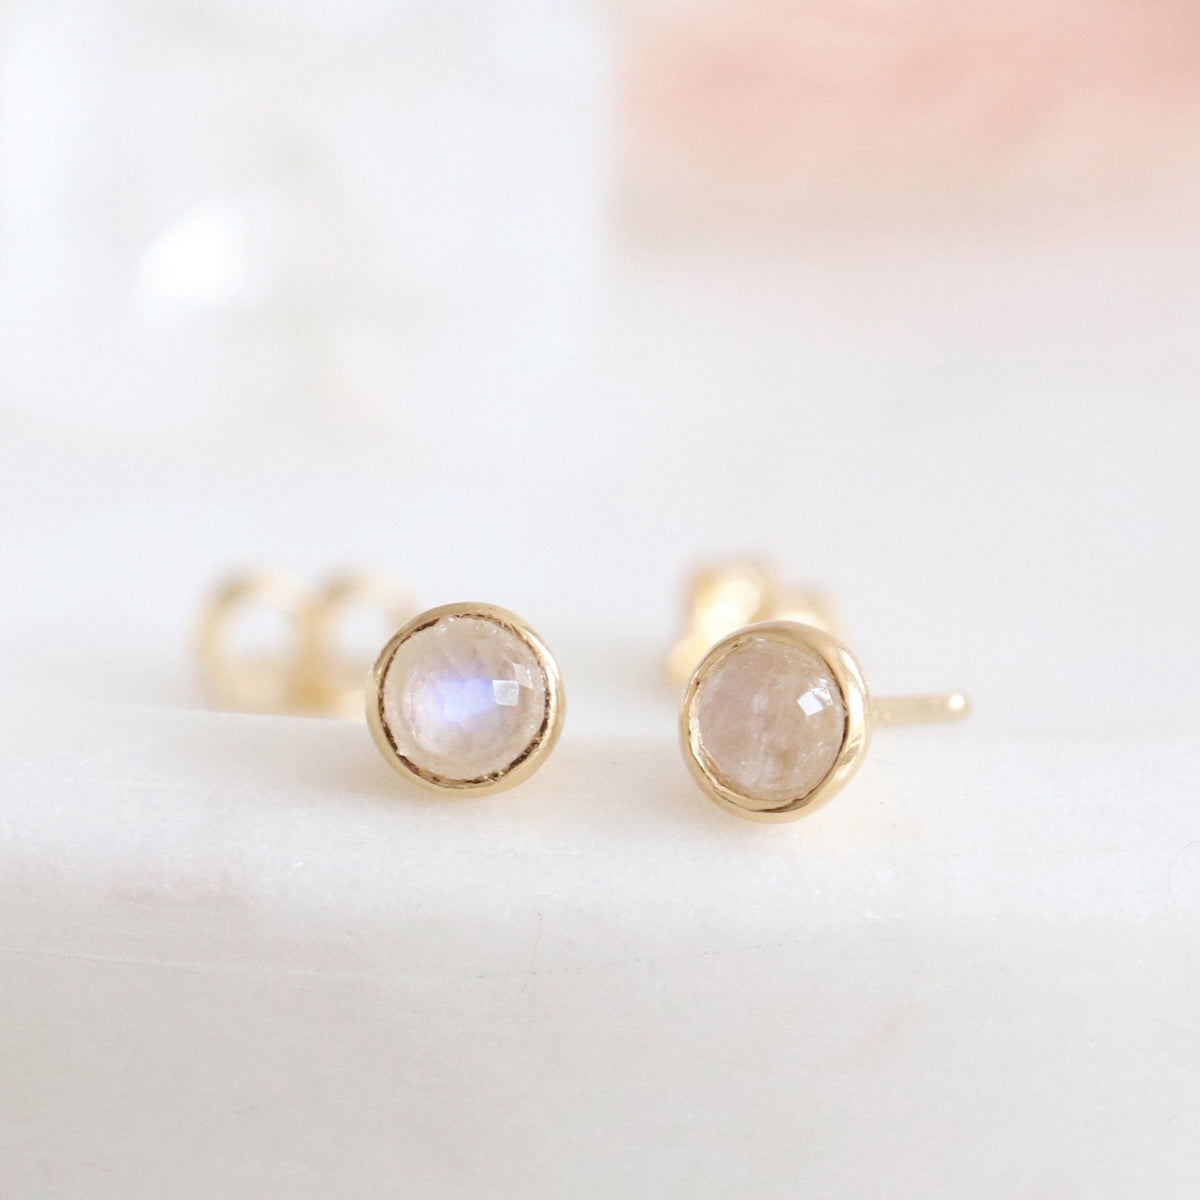 TINY PROTECT STUD EARRINGS - RAINBOW MOONSTONE &amp; GOLD - SO PRETTY CARA COTTER